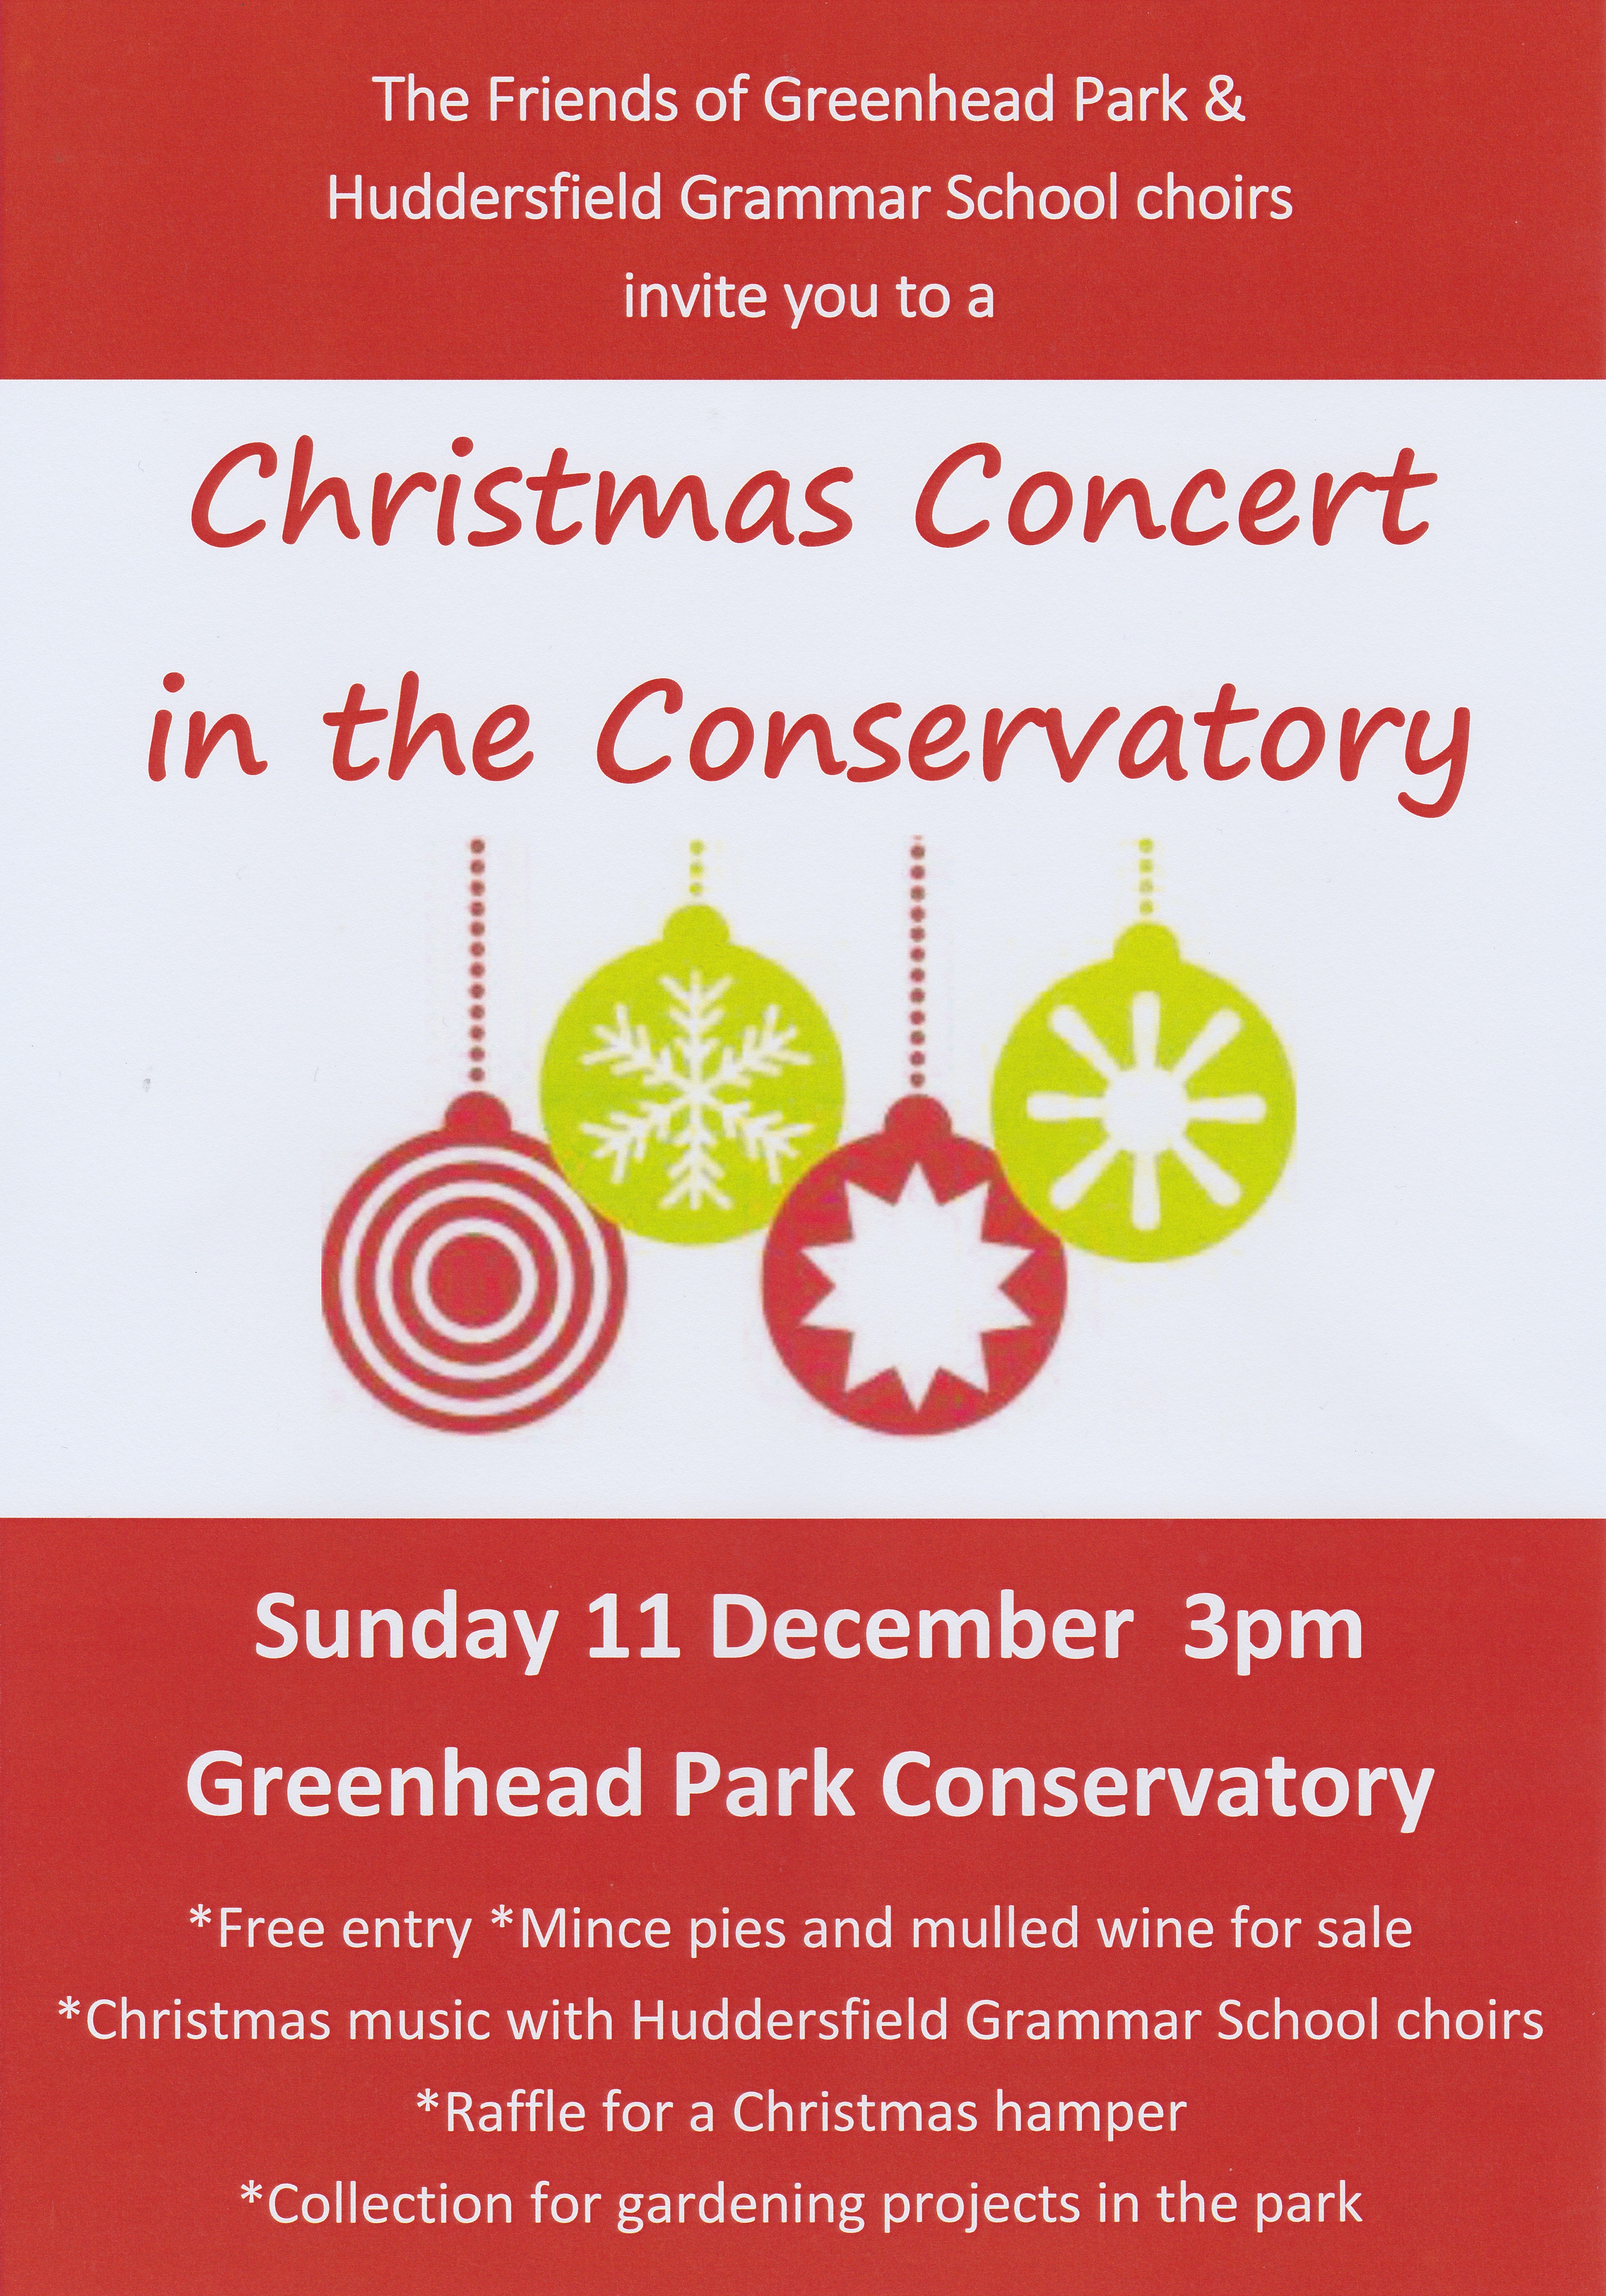 Christmas Concert in the Greenhead Park Conservatory